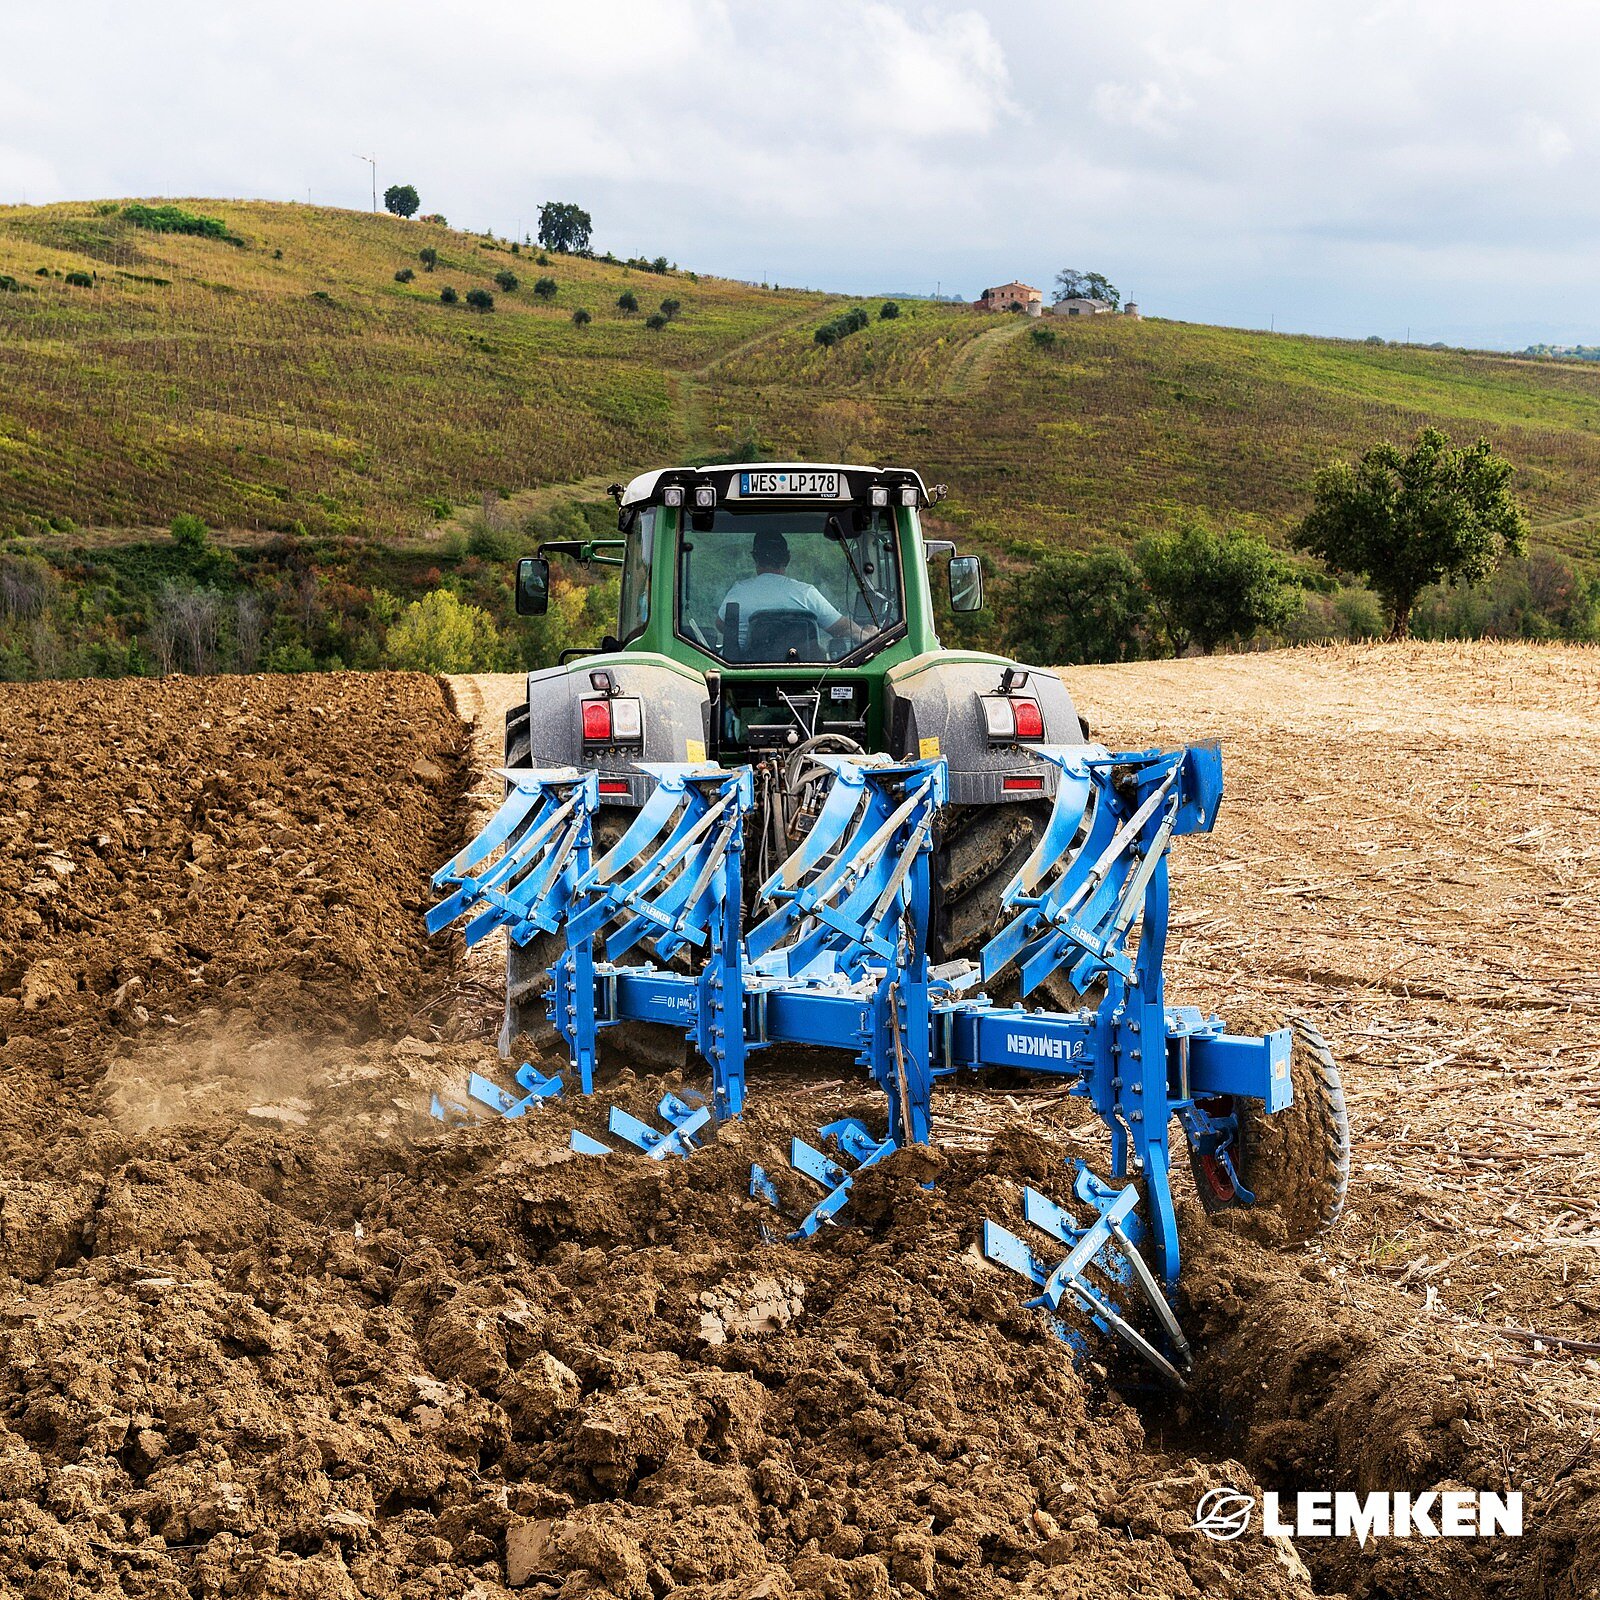 The Juwel 10 is our most powerful mounted reversible plough. Designed for the toughest conditions it is approved for...